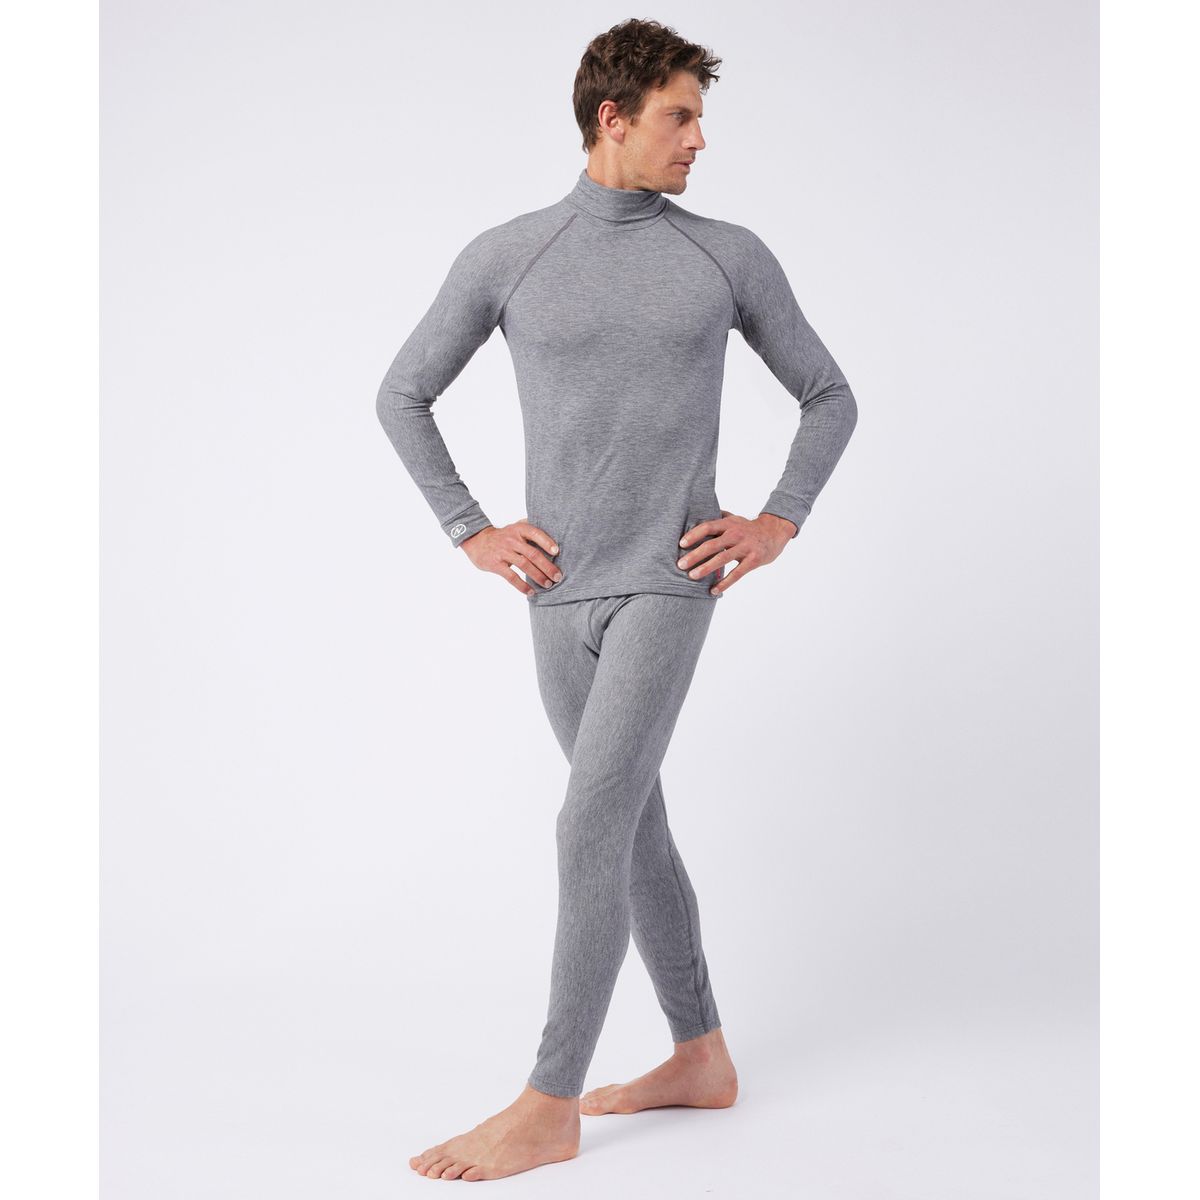 TEE SHIRT MANCHES LONGUES HOMME DAMART COMFORT THERMOLACTYL 4 ZIPPE - GRIS